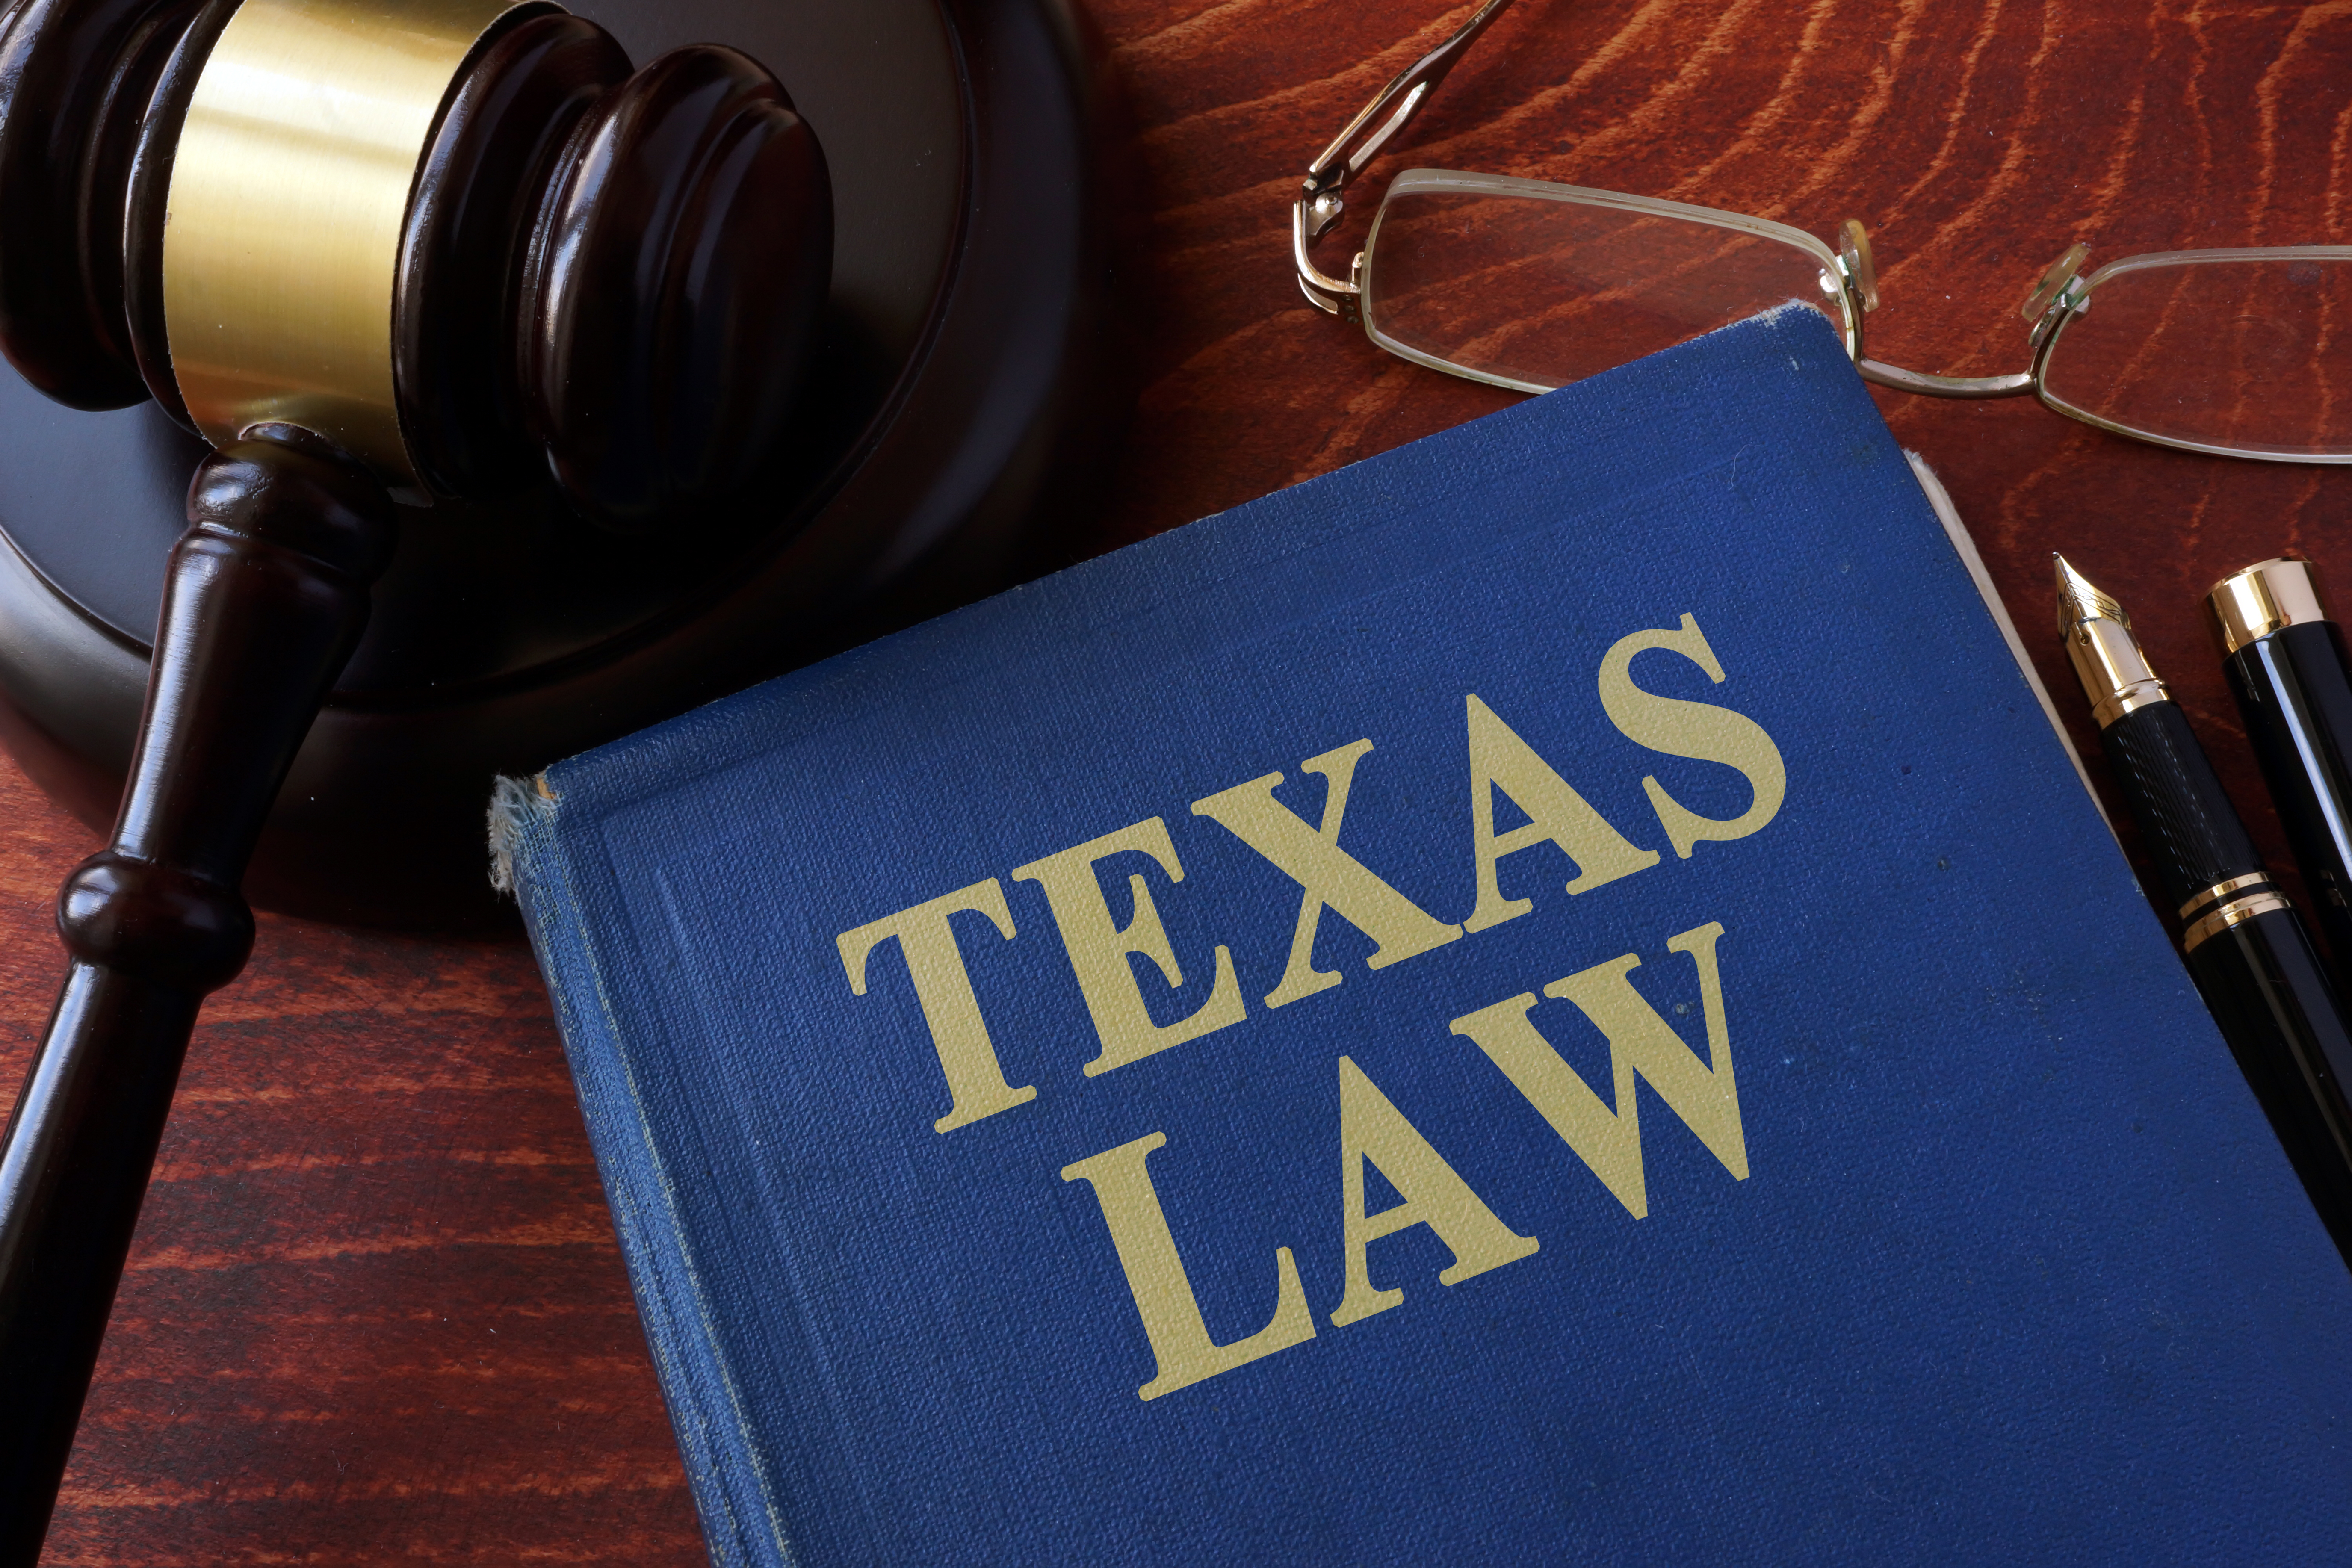 Book with title Texas law and a gavel | Source: Shutterstock